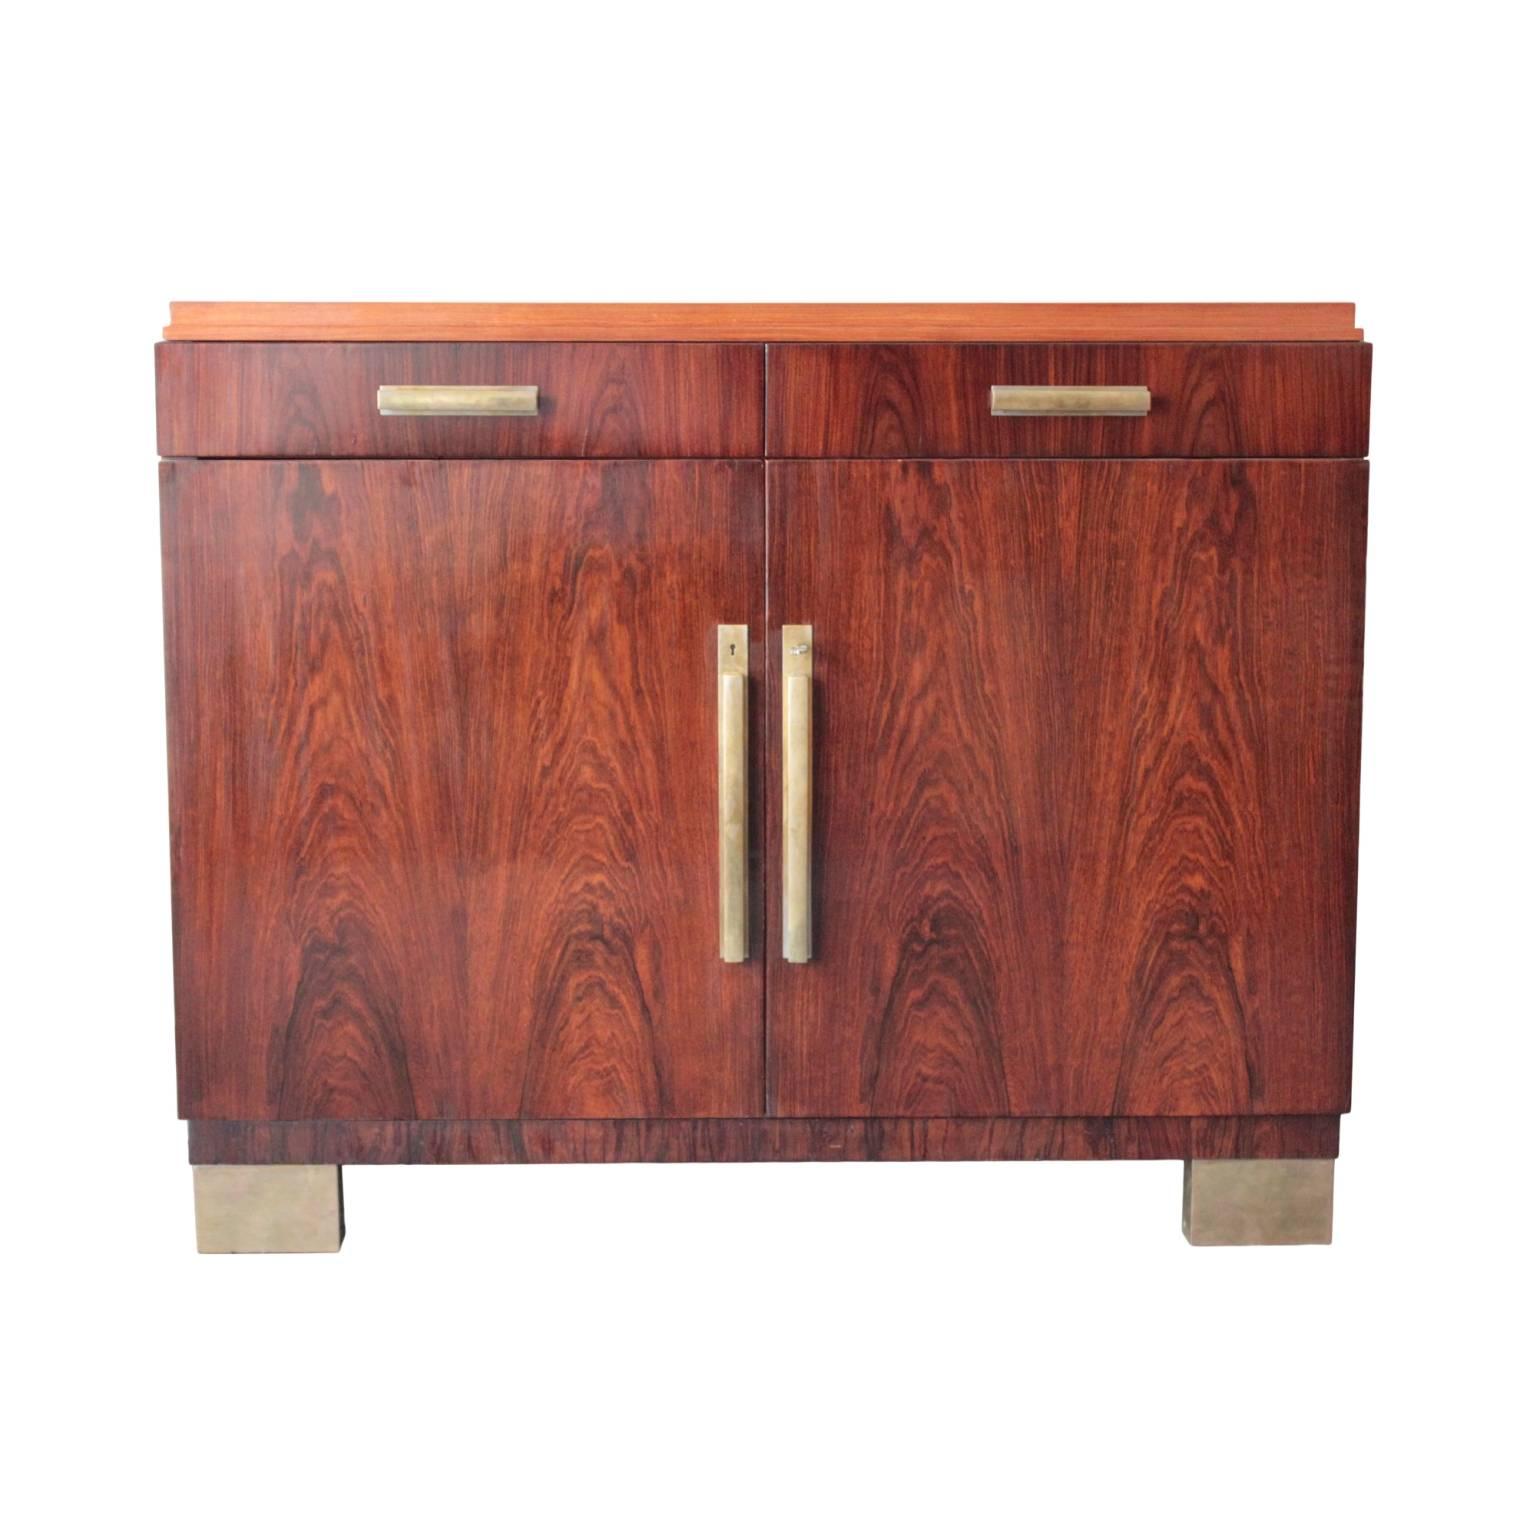 Distinctive server in rosewood having a (later) Carrara marble top, pair of drawers and a pair of doors enclosing a single adjustable shelf. Fitted with long brass handles. Beautiful original key. Raised on four brass lined block legs, aesthetically